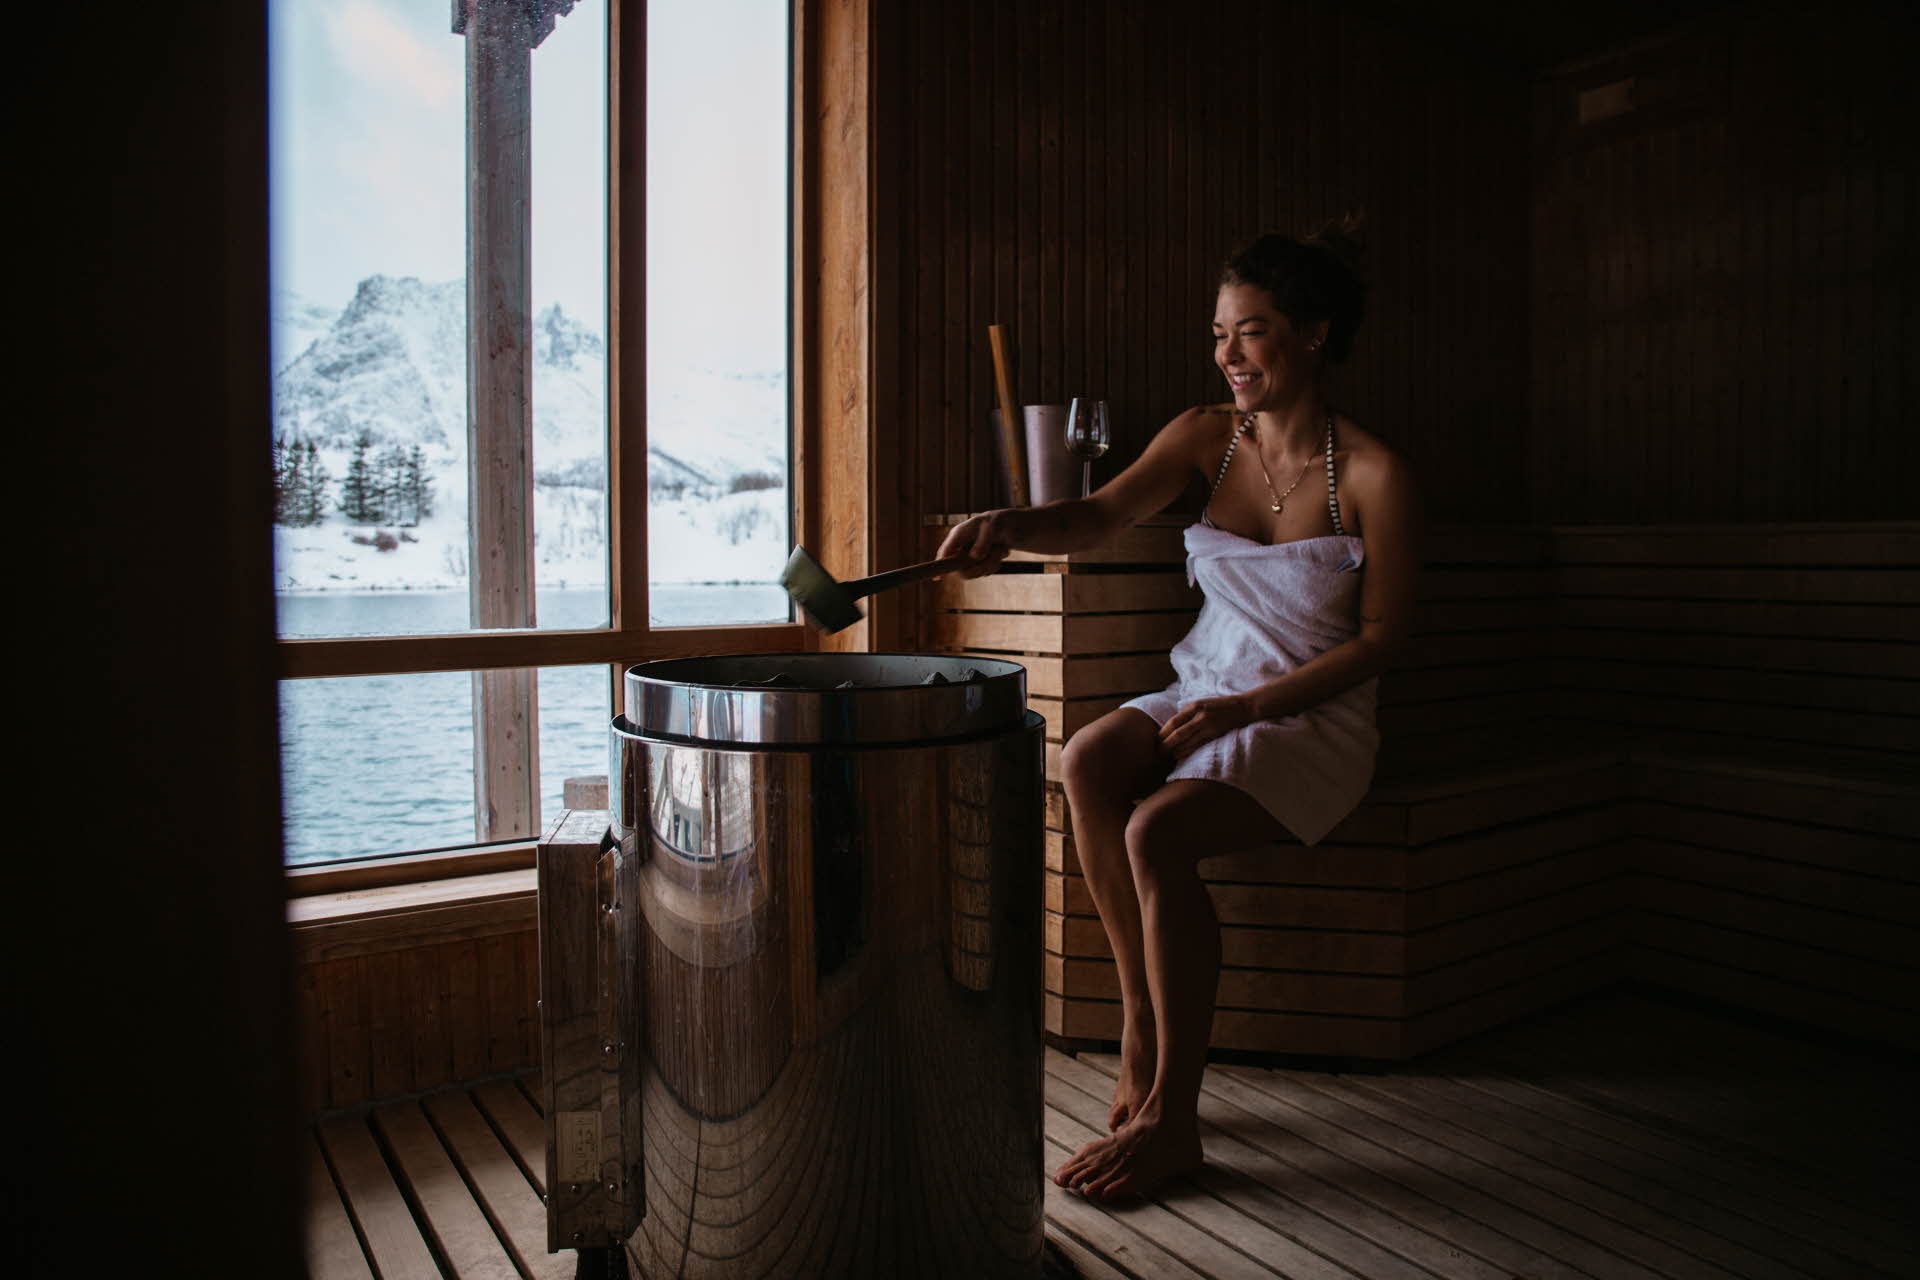 A woman wearing a towel in a sauna by large windows. Snowy mountains outside 